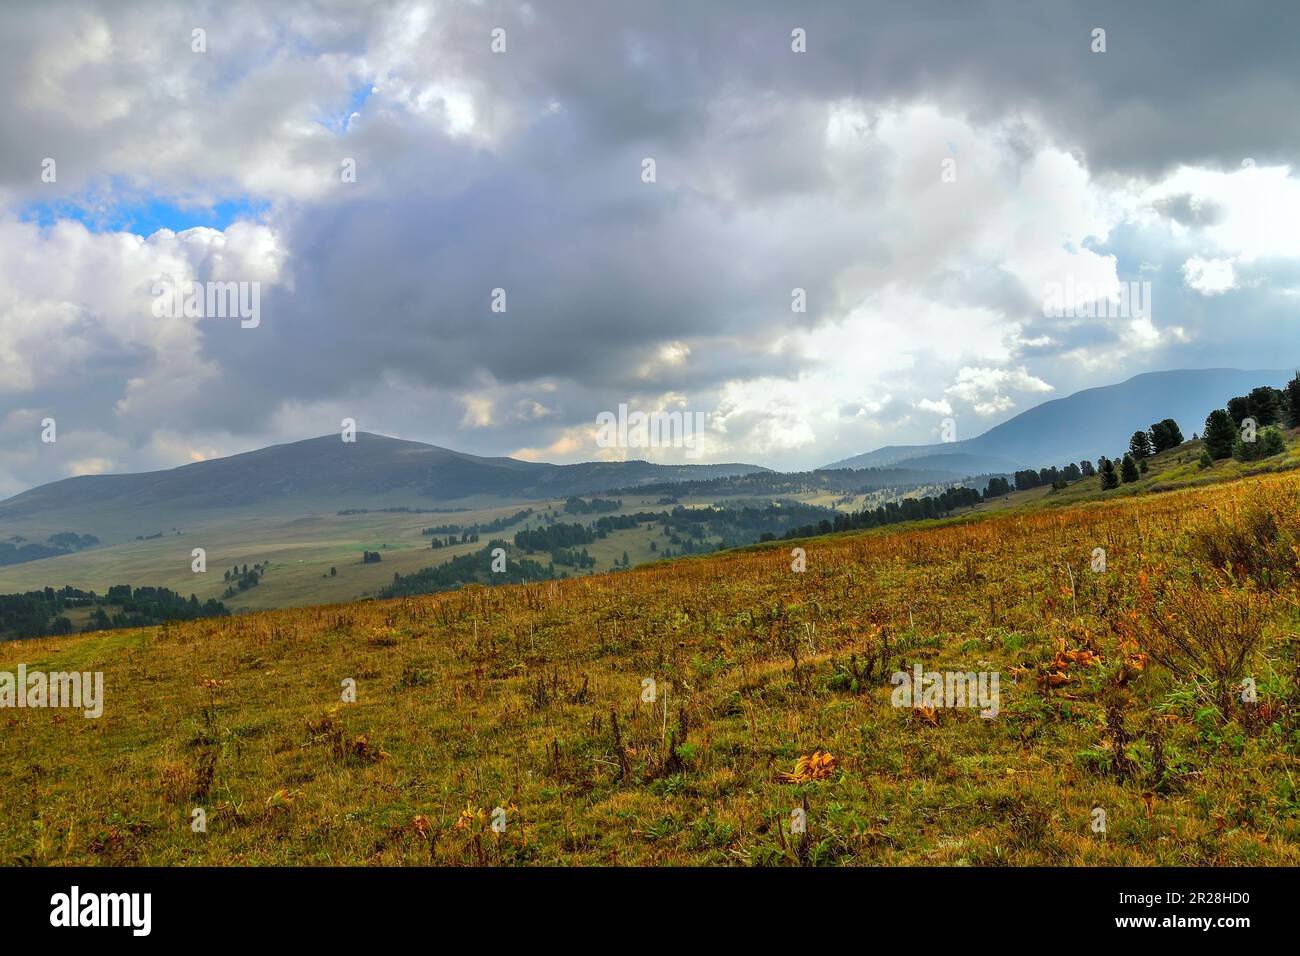 Beautiful summer mountain landscape in cloudy weather. Colorful dwarf vegetation in foreground and a chain of Altai mountains in the blue morning mist Stock Photo